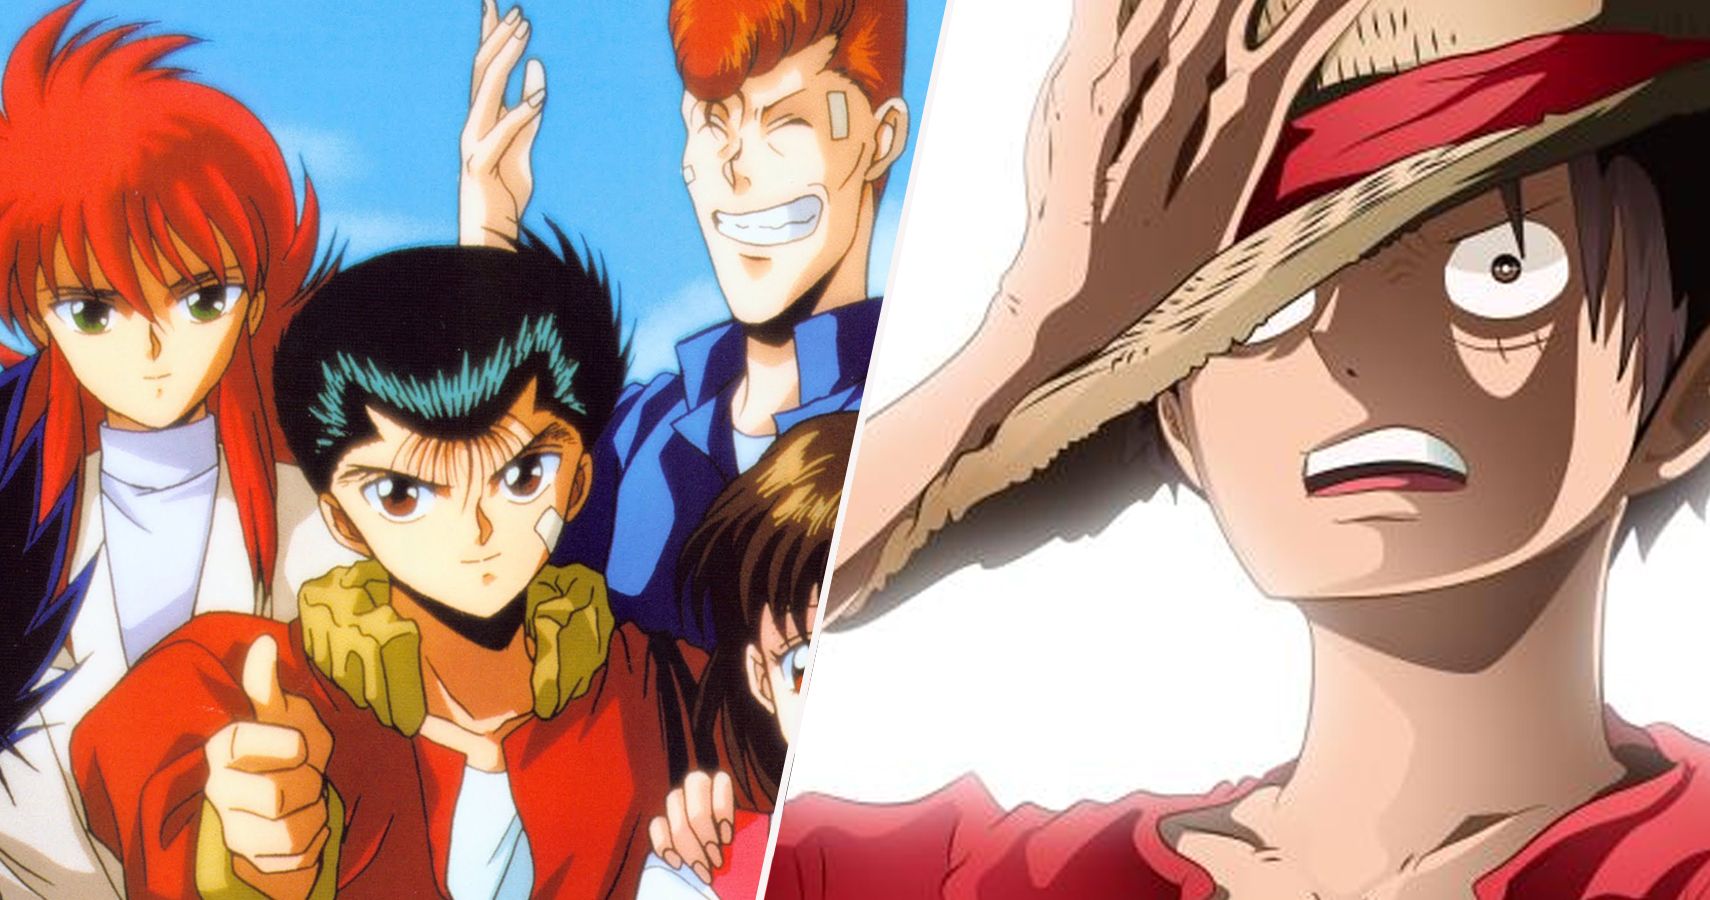 20 Anime Series Netflix Should Reboot (5 They Shouldn't Touch)